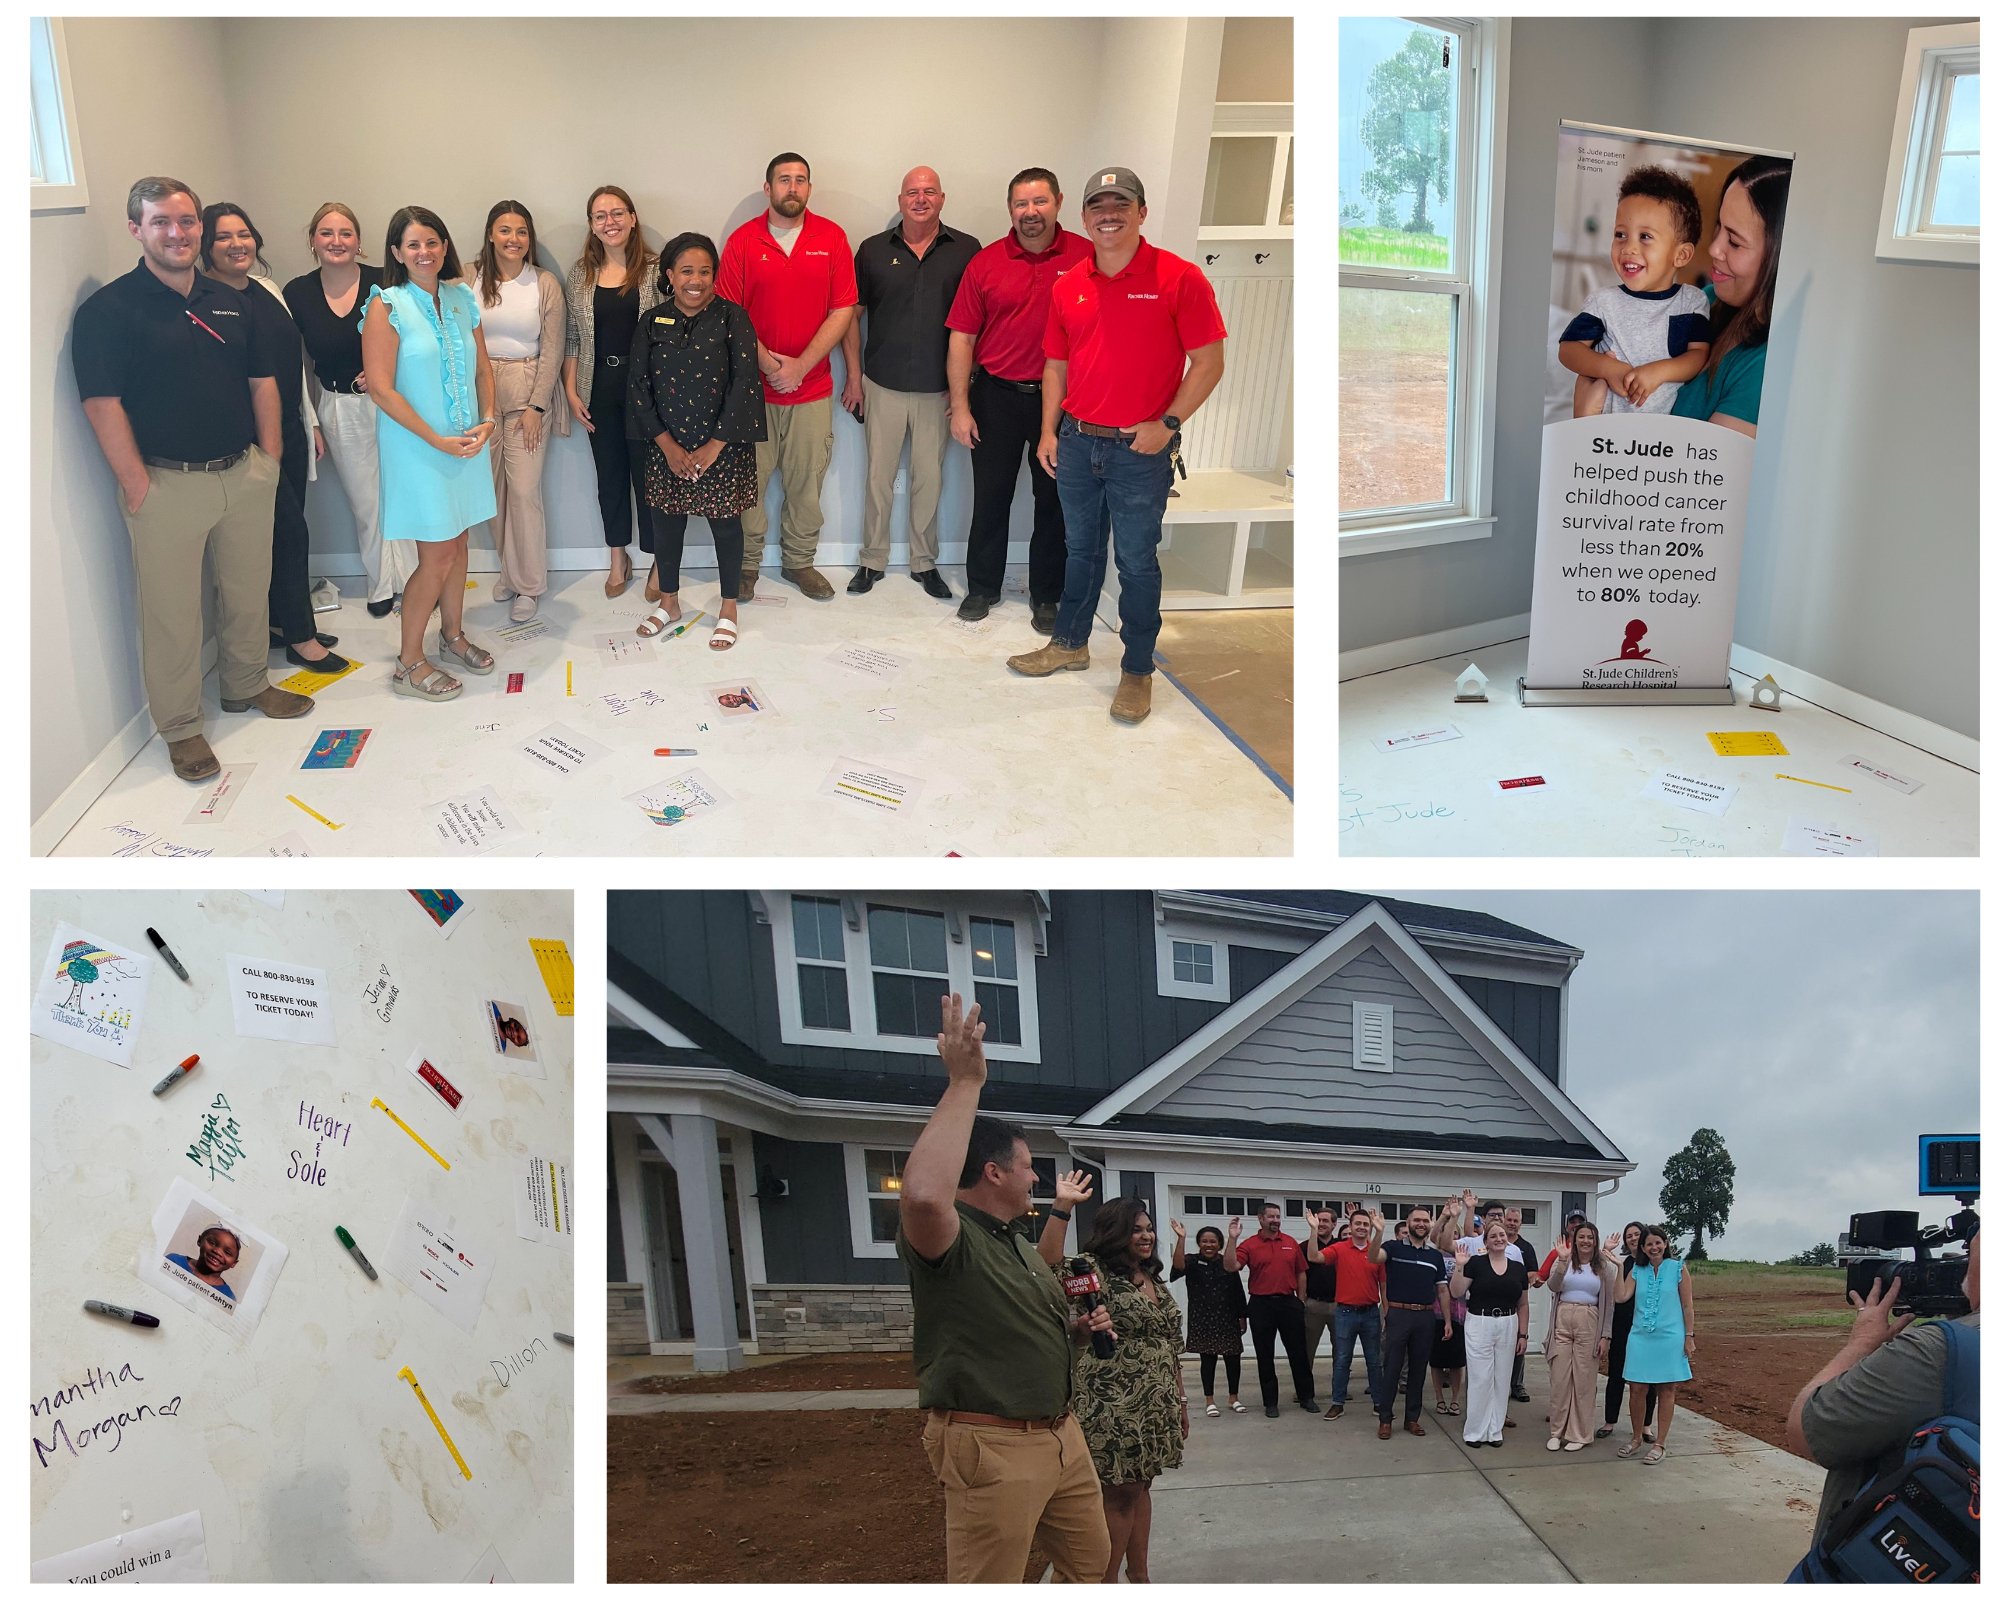 On Thursday, July 28th Fischer Homes hosted the annual Floor Signing Event at the Louisville St. Jude Dream Home, inviting vendors and their teams to come out and sign the floors to support the children of St. Jude.